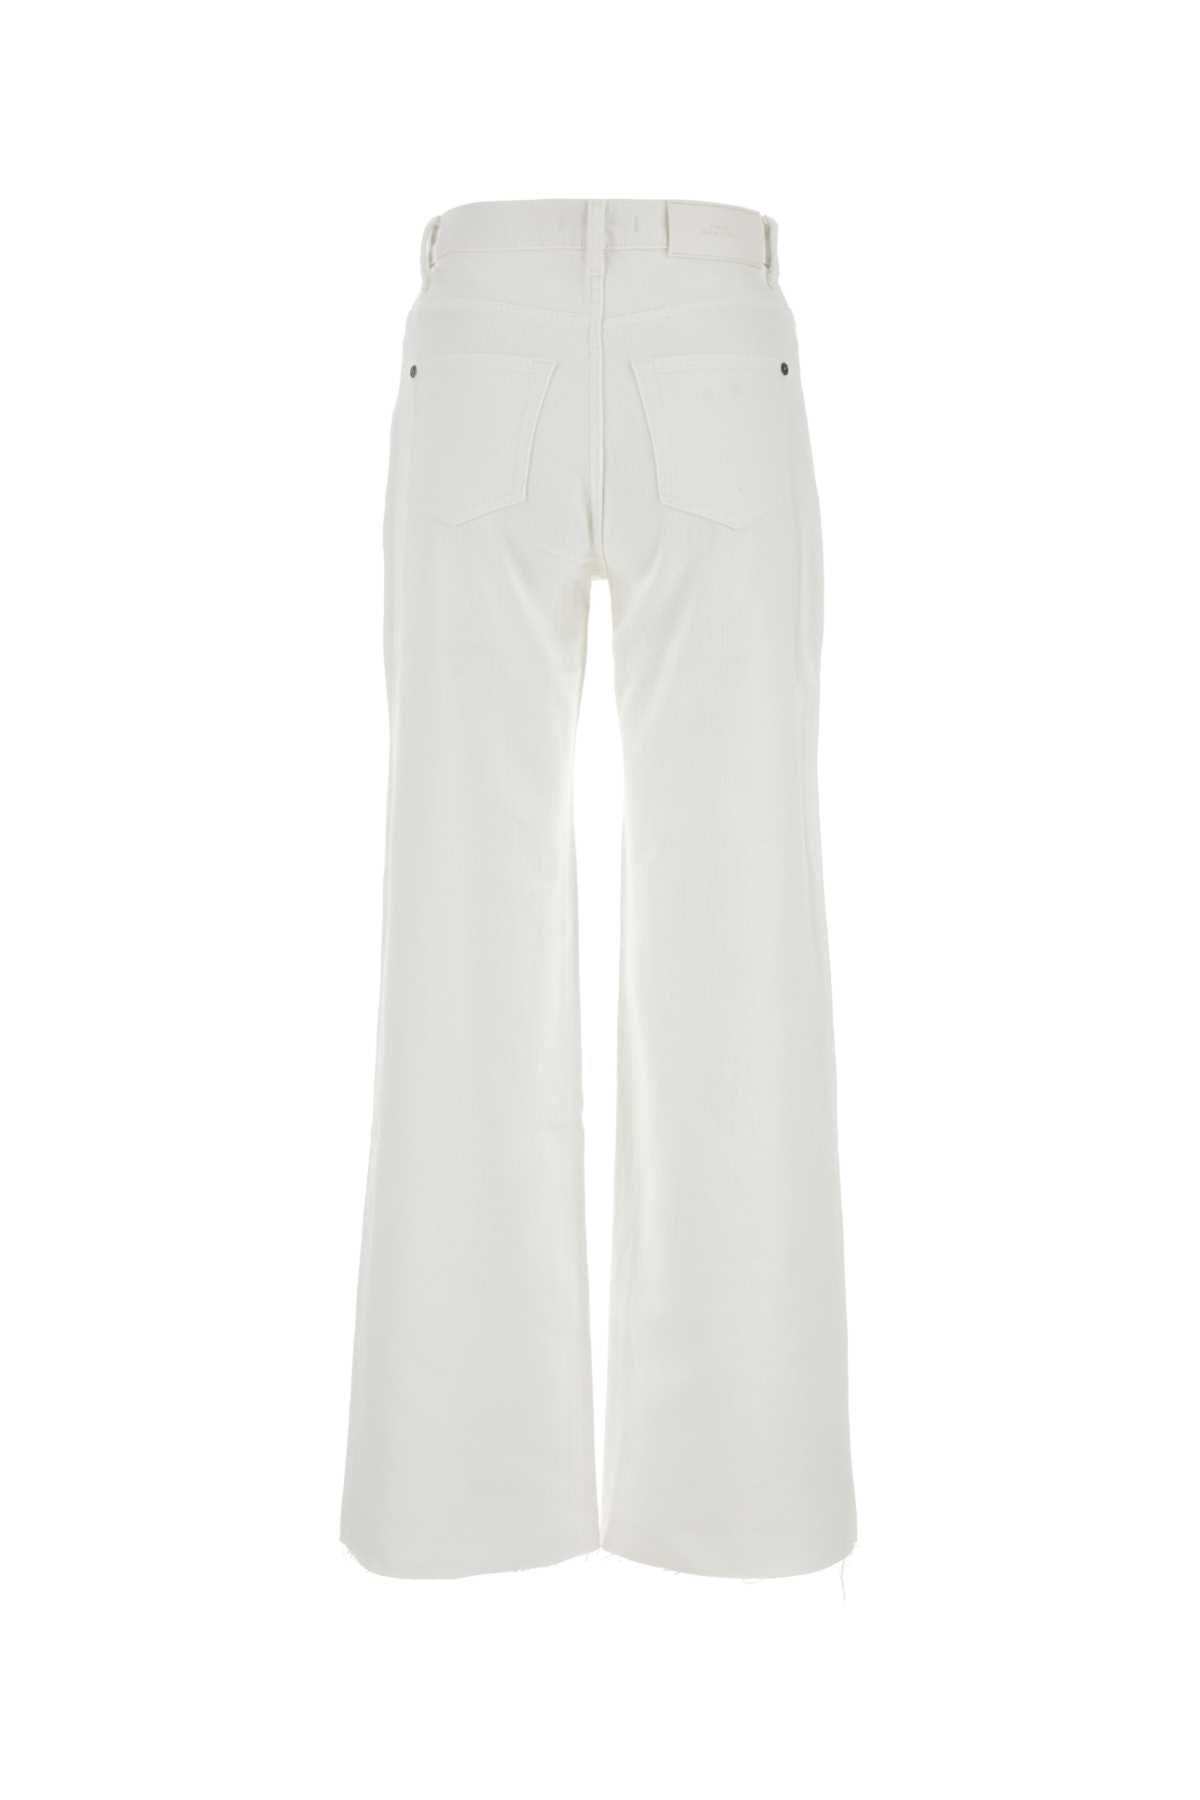 7 For All Mankind White Stretch Denim Jeans